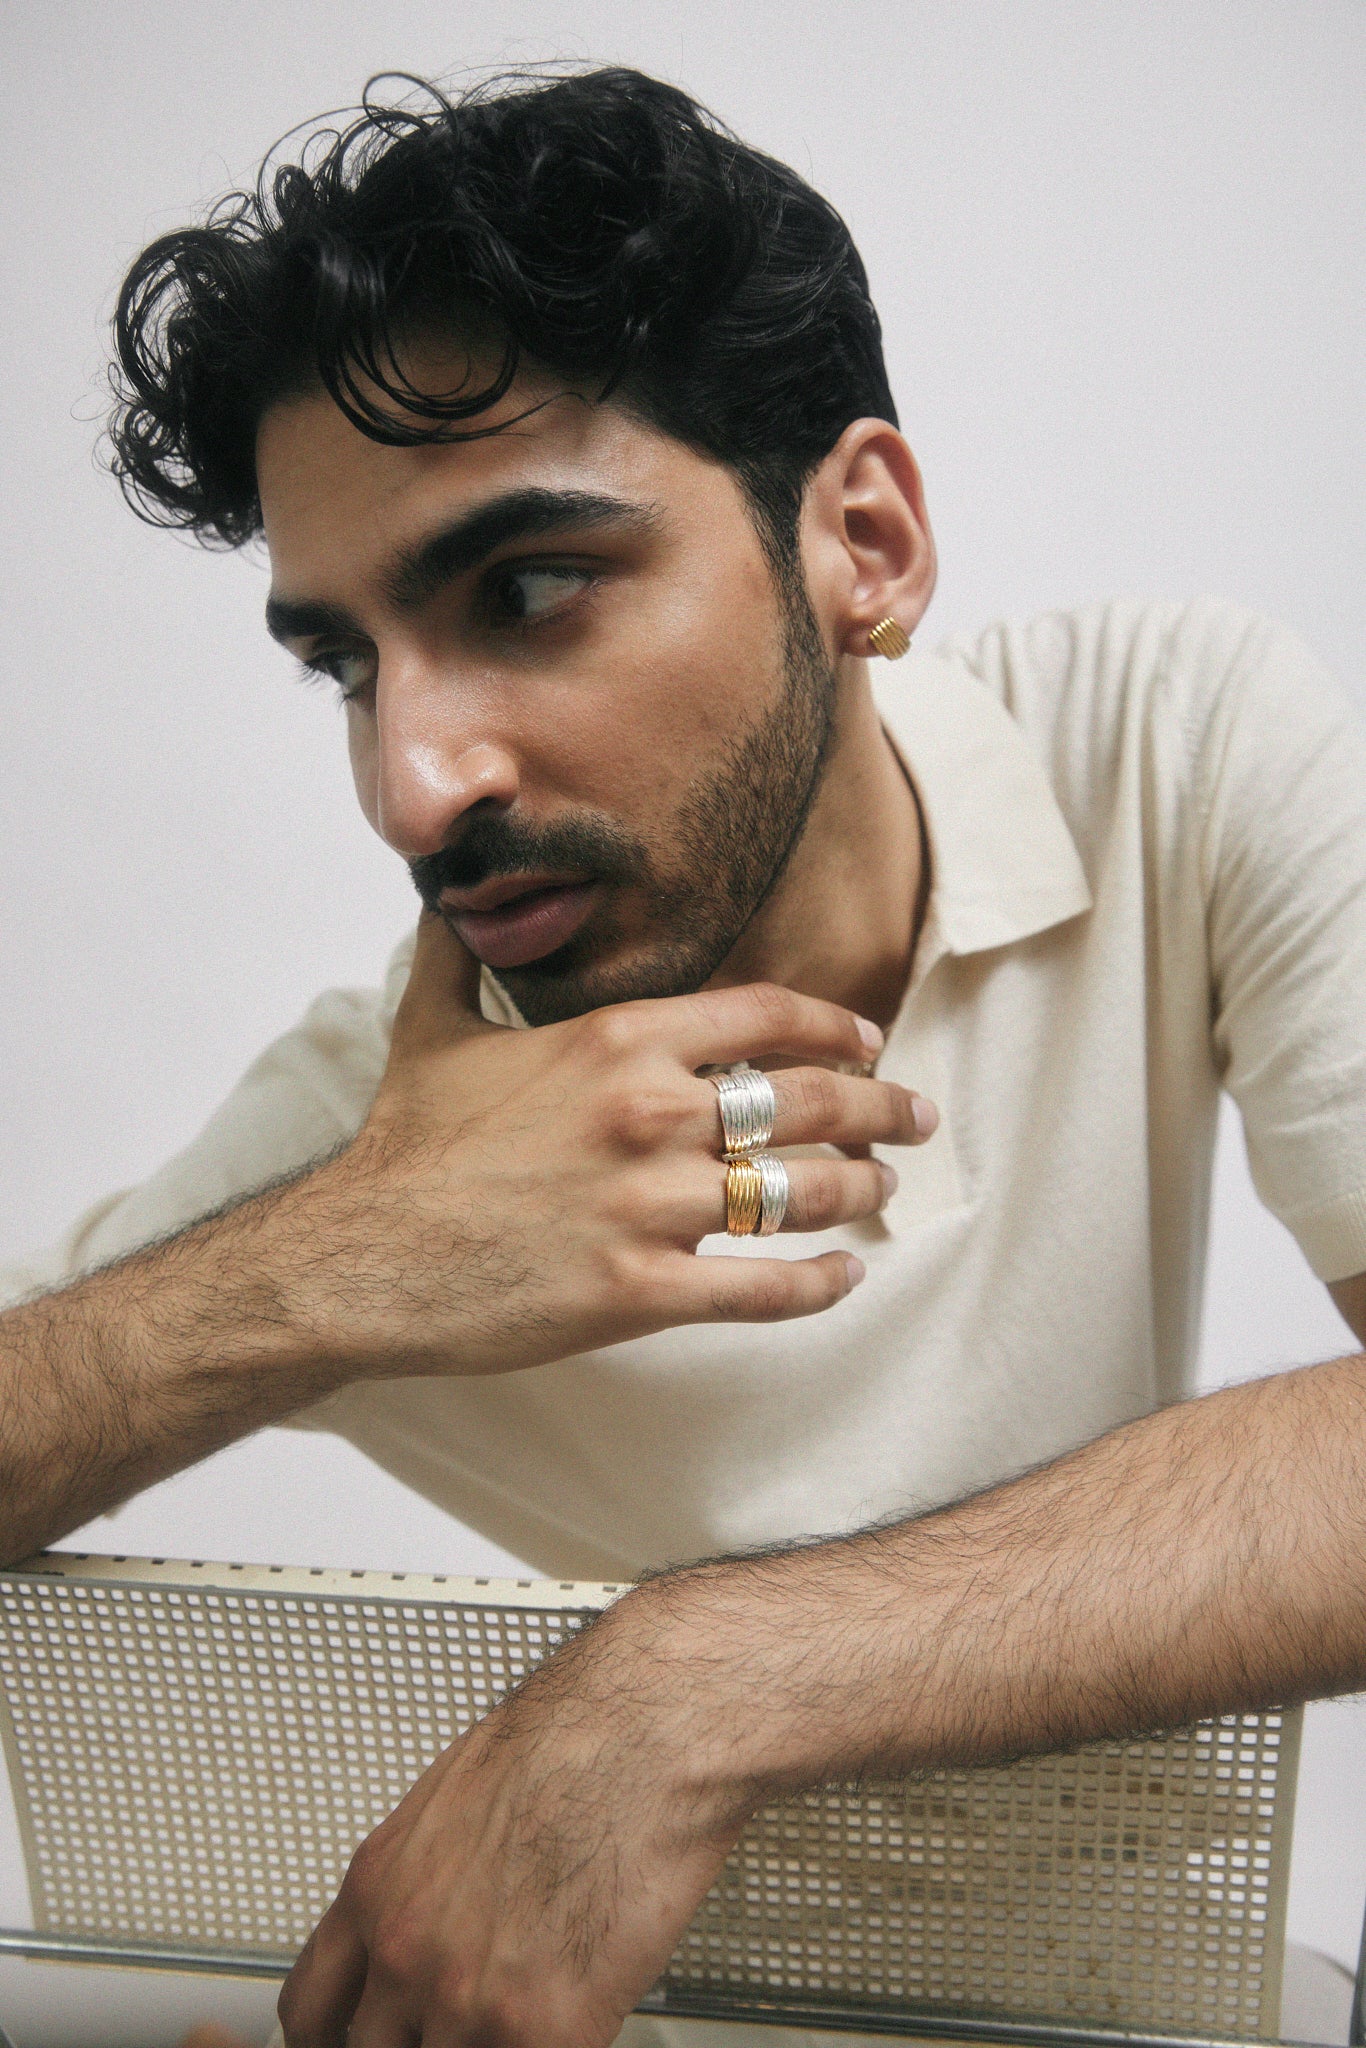 Man poses on chair, wearing many rings